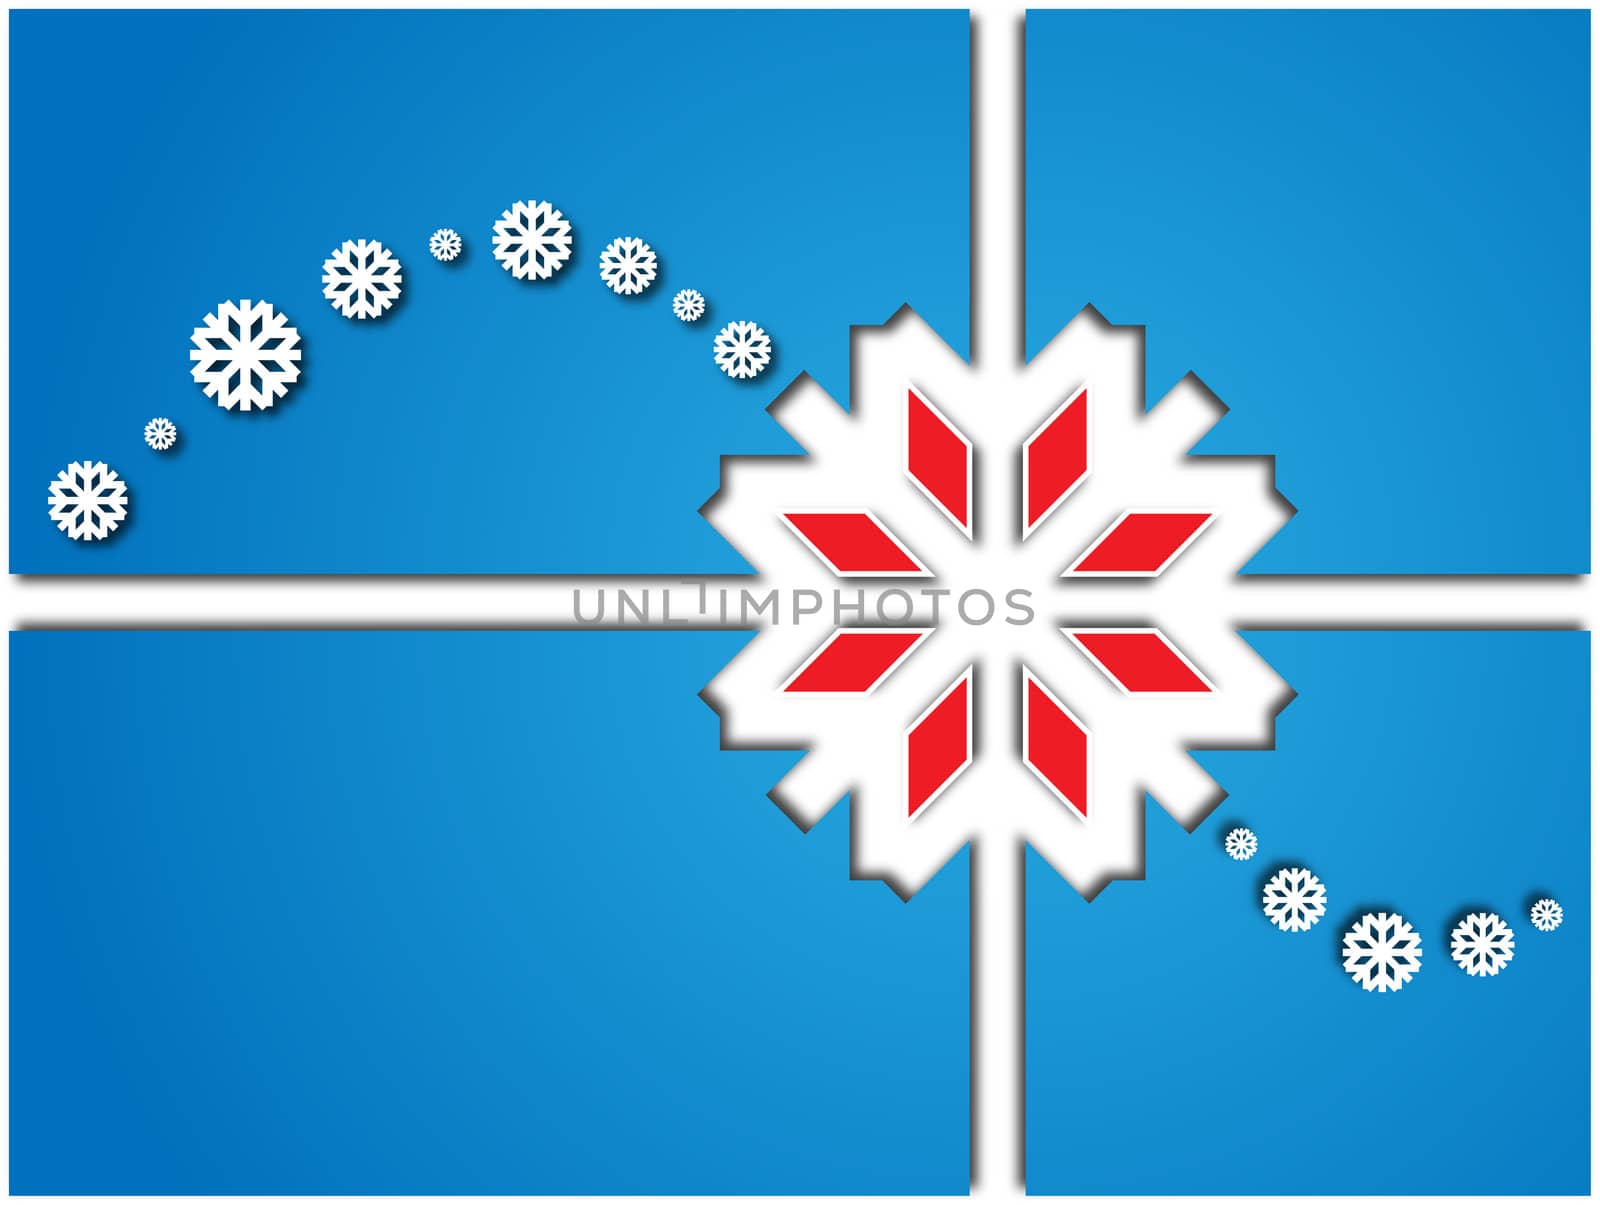 card with blue area divided into quarters snowflakes and wavelets